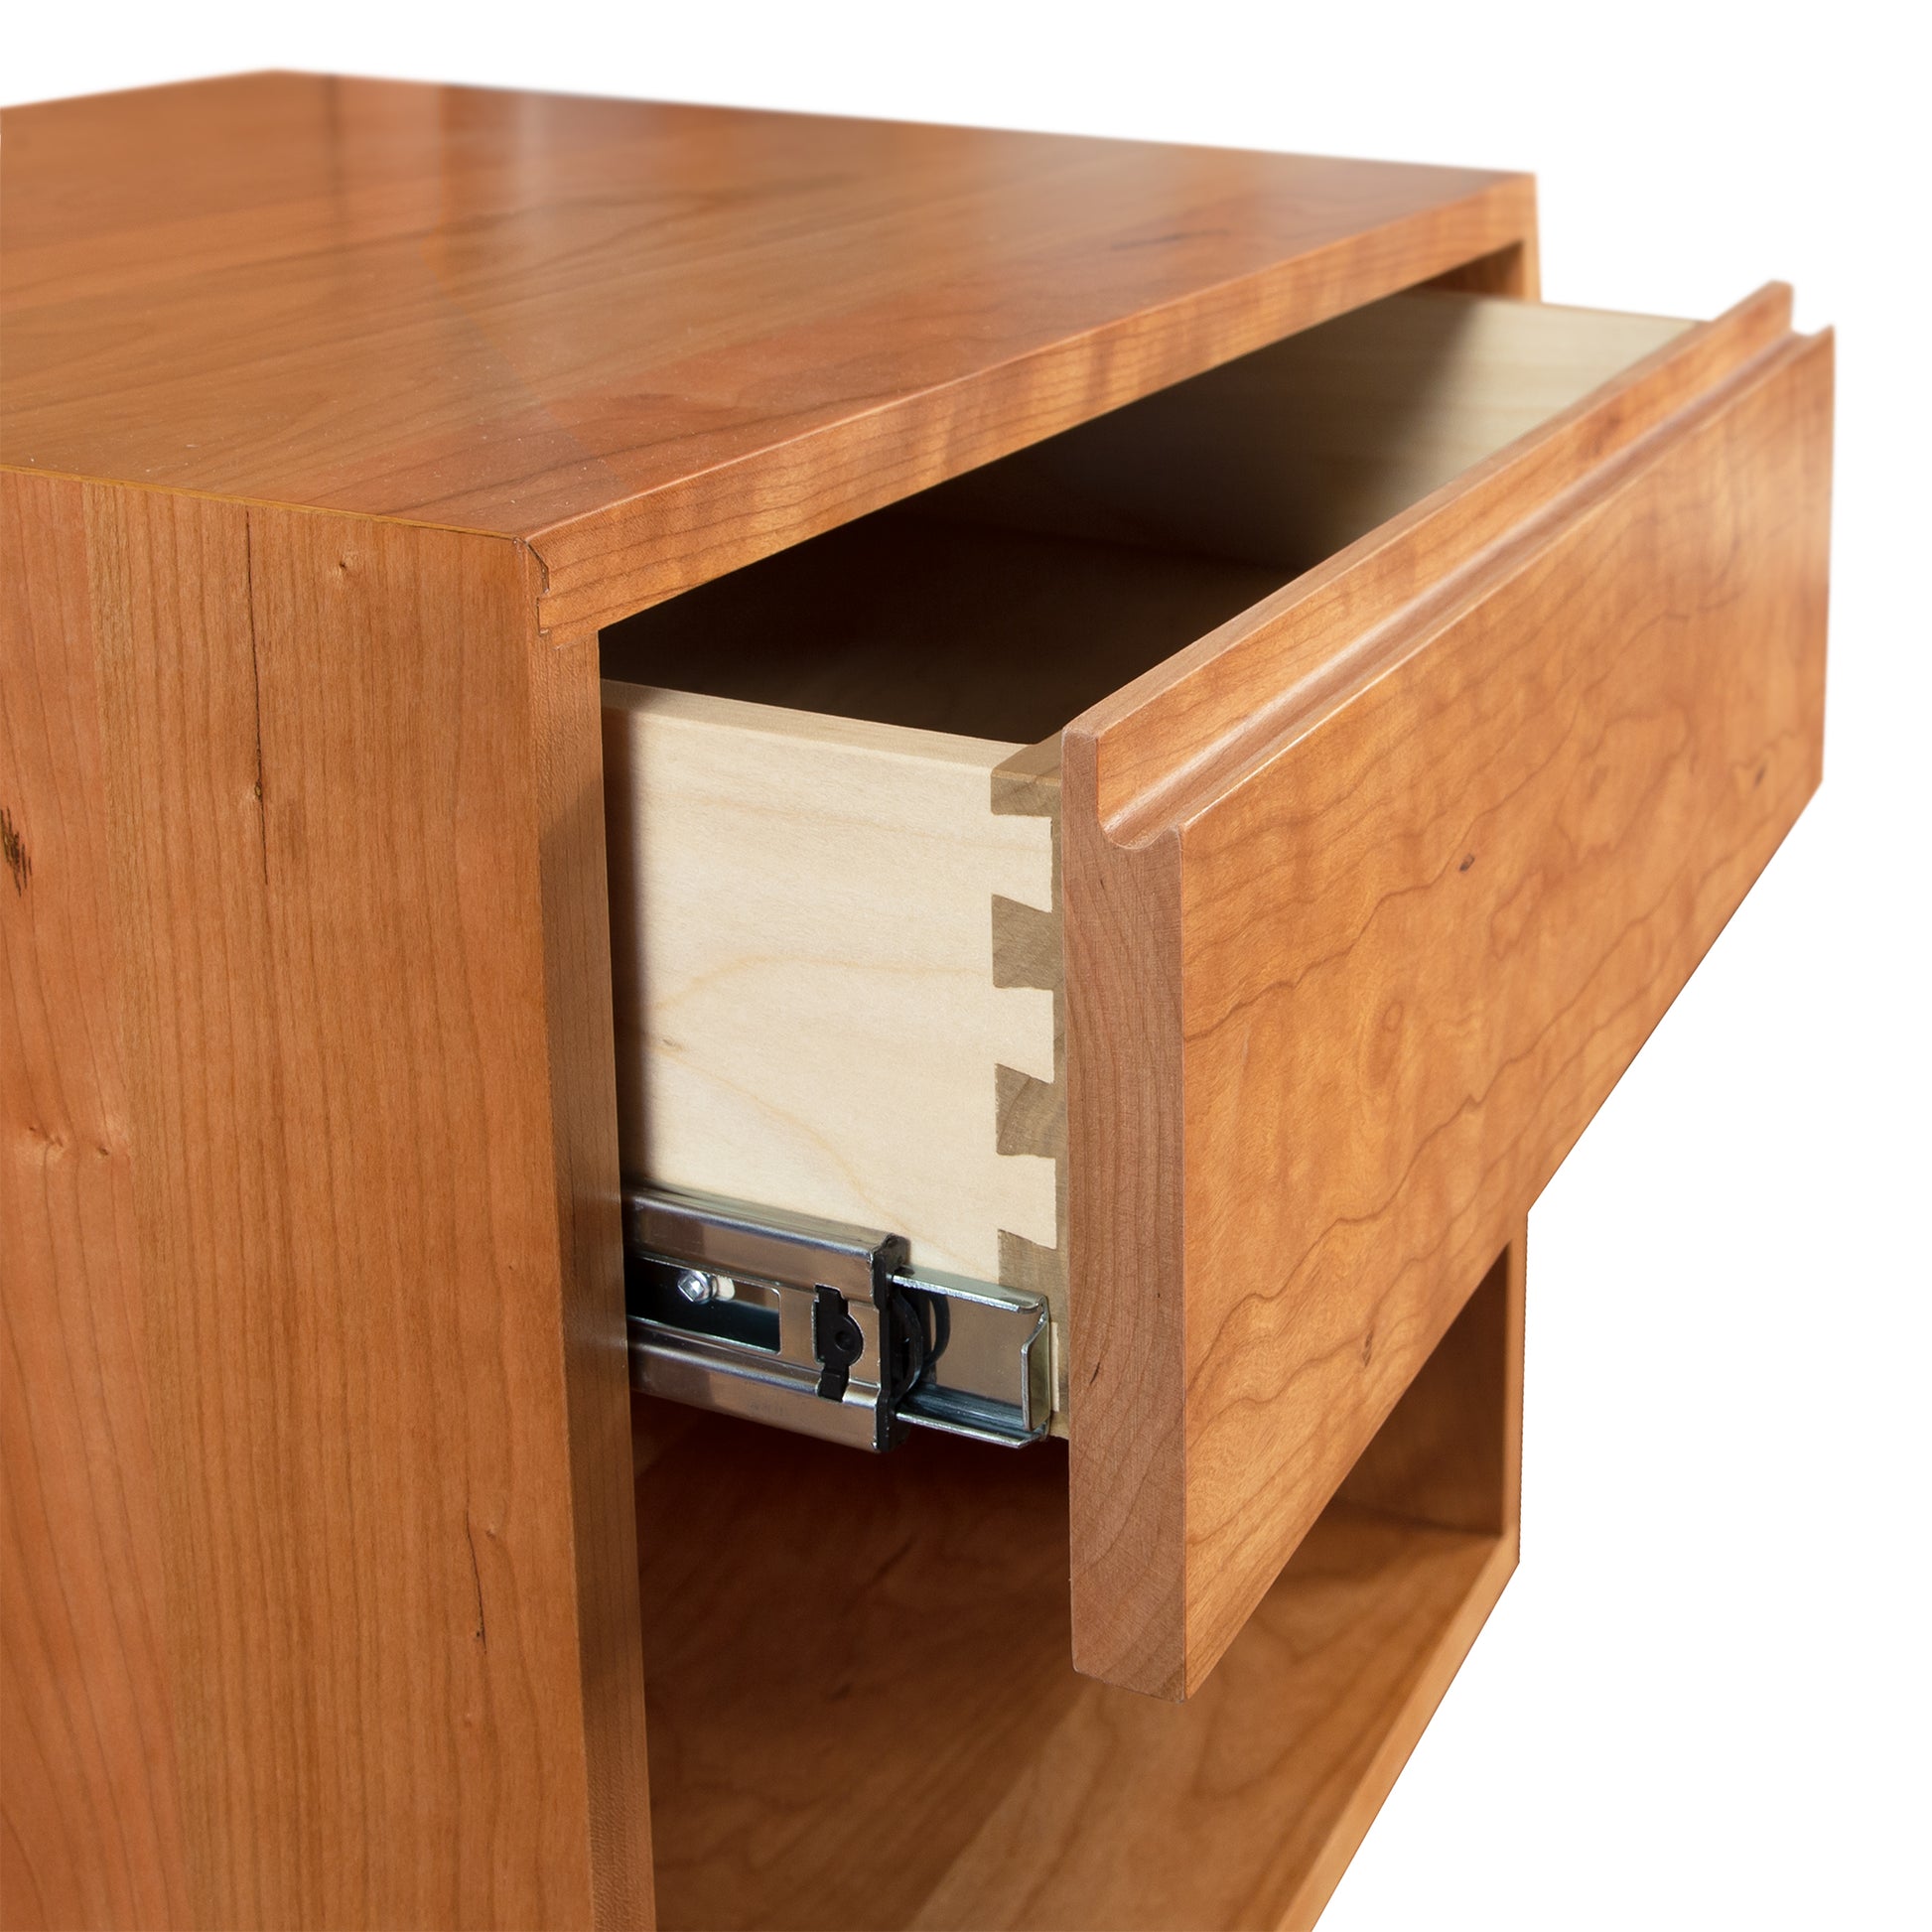 A wooden nightstand with an open drawer.